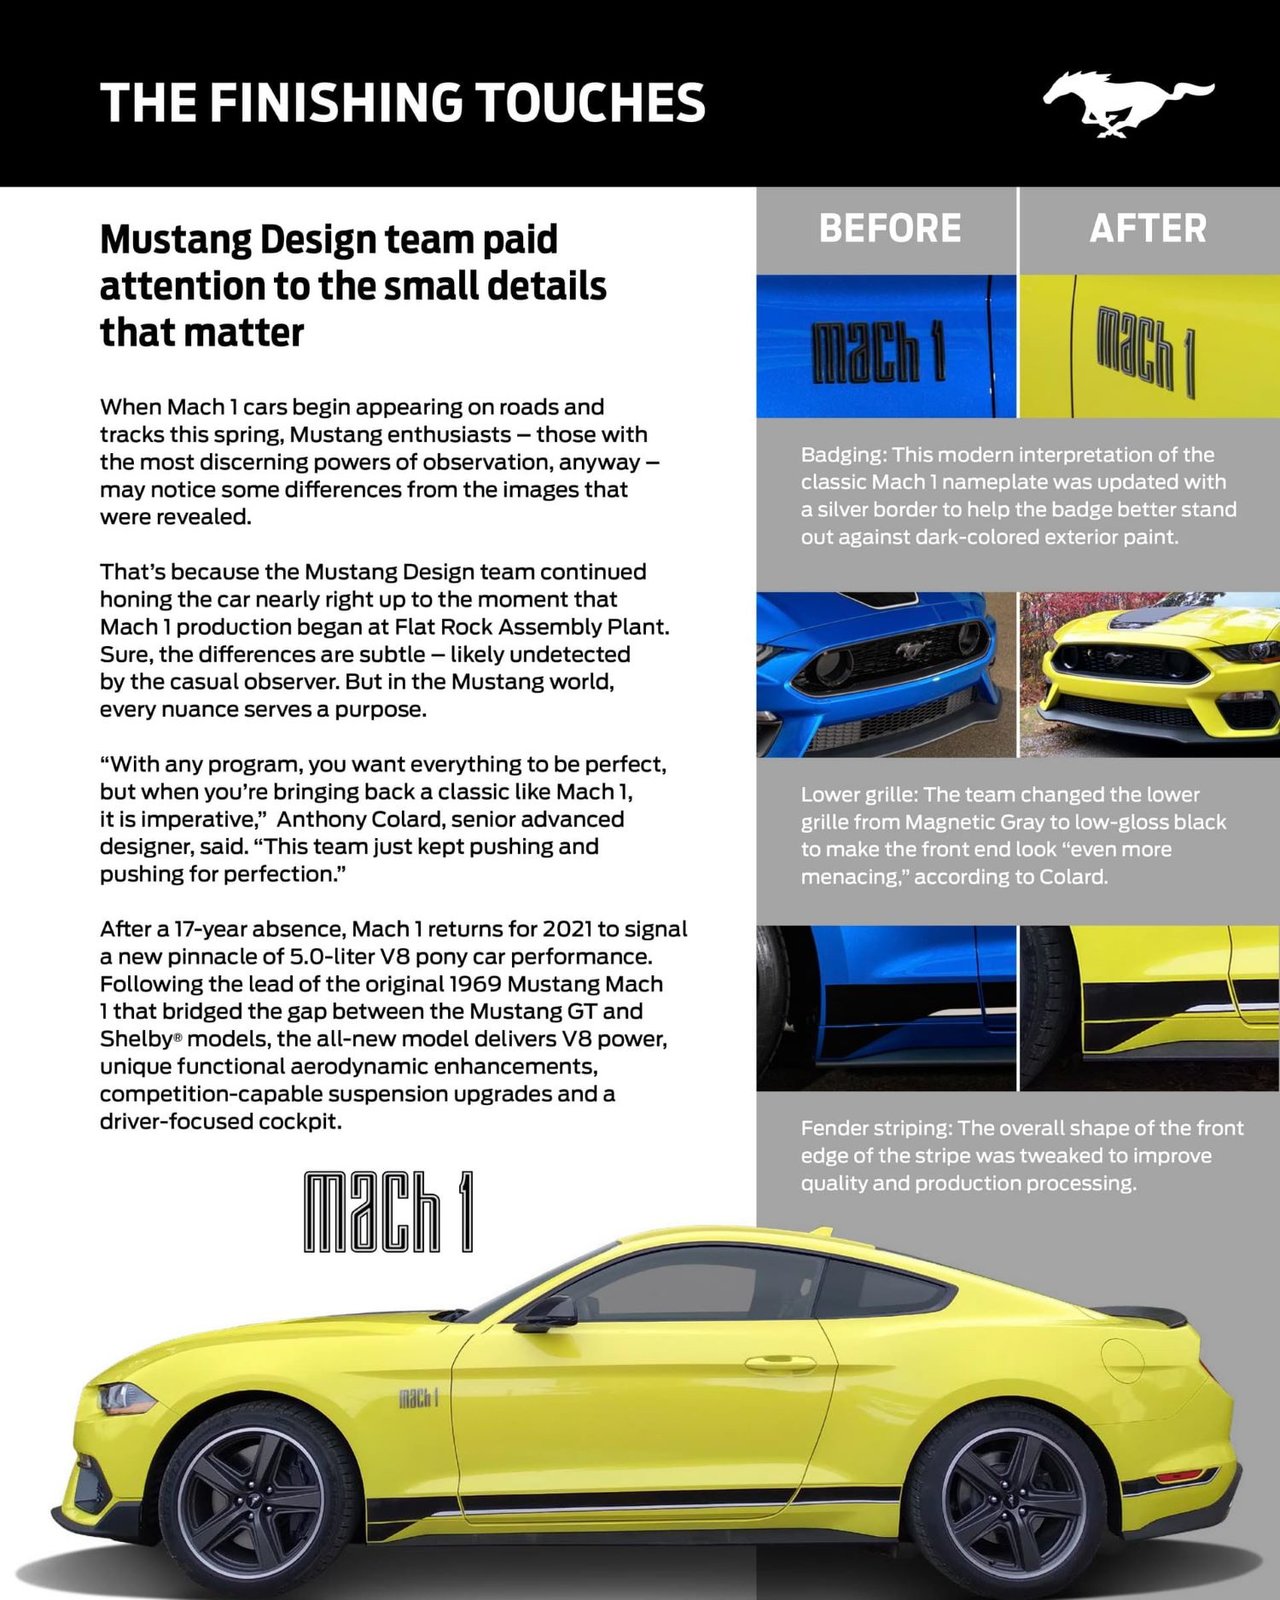 2021-Ford-Mustang-Mach-1-New-Design-Infographic.jpg